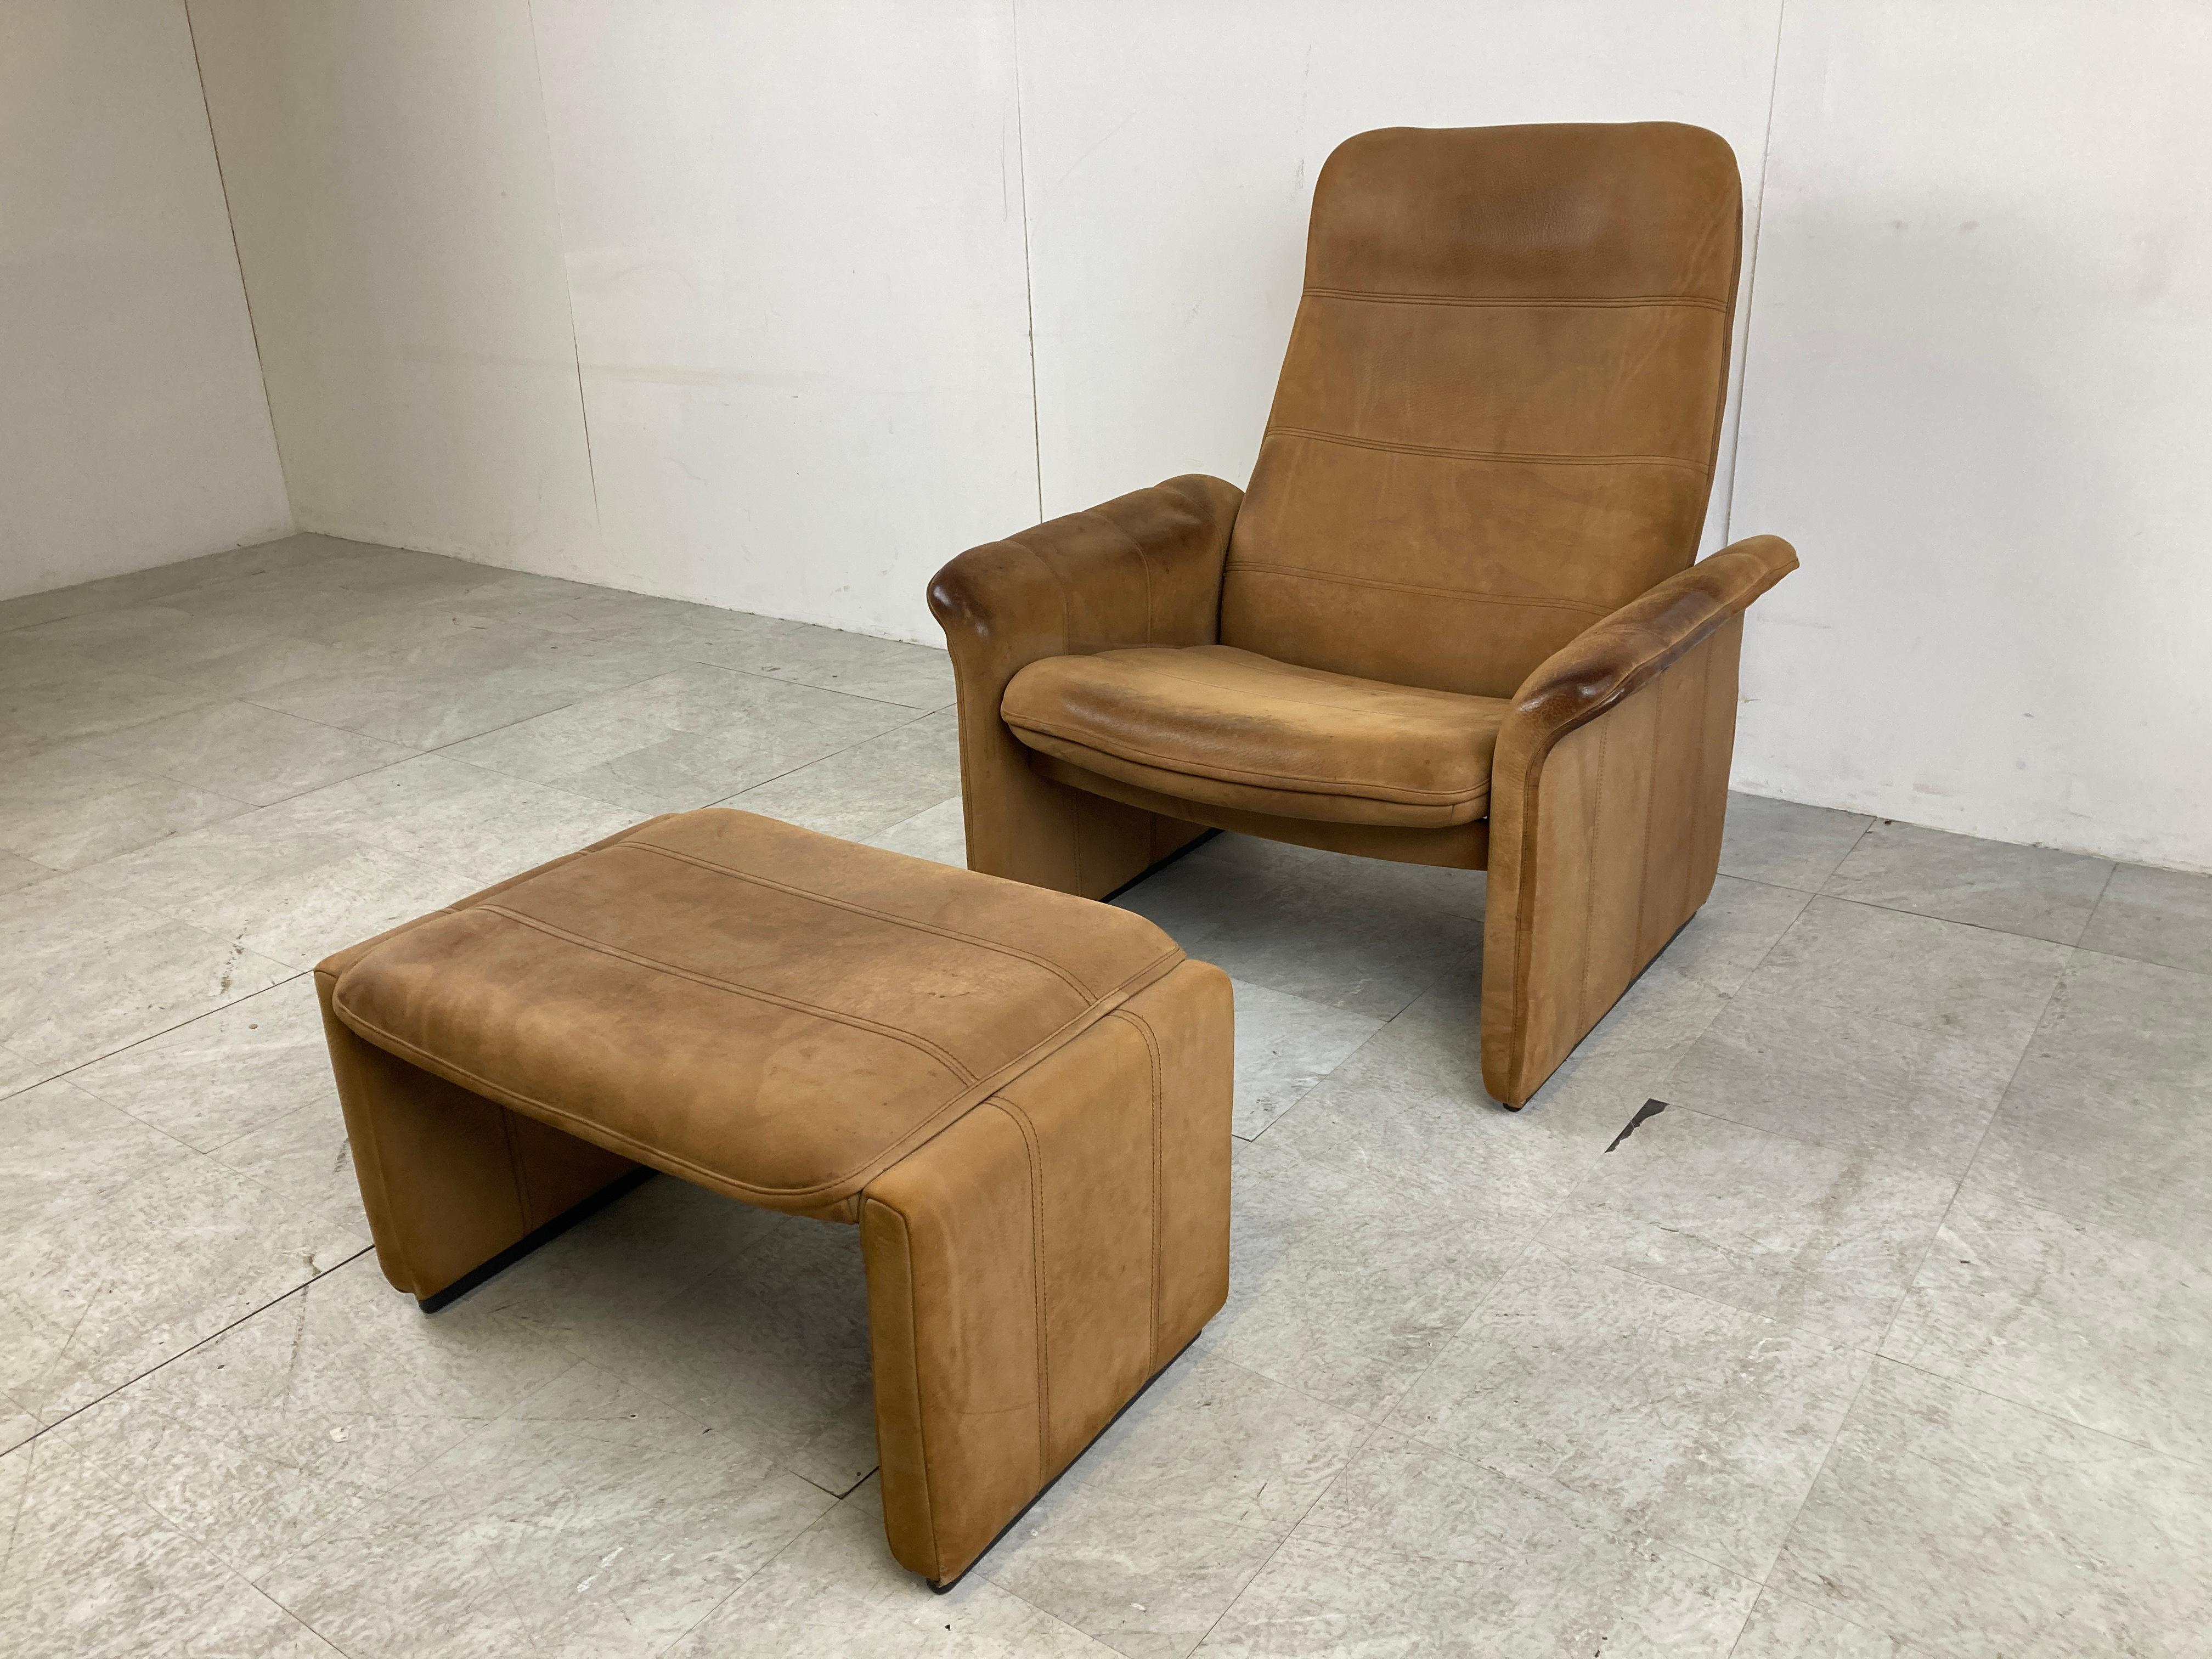 Swiss Vintage Ds 50 Leather Lounge Chair and Ottoman by De Sede, 1970s For Sale